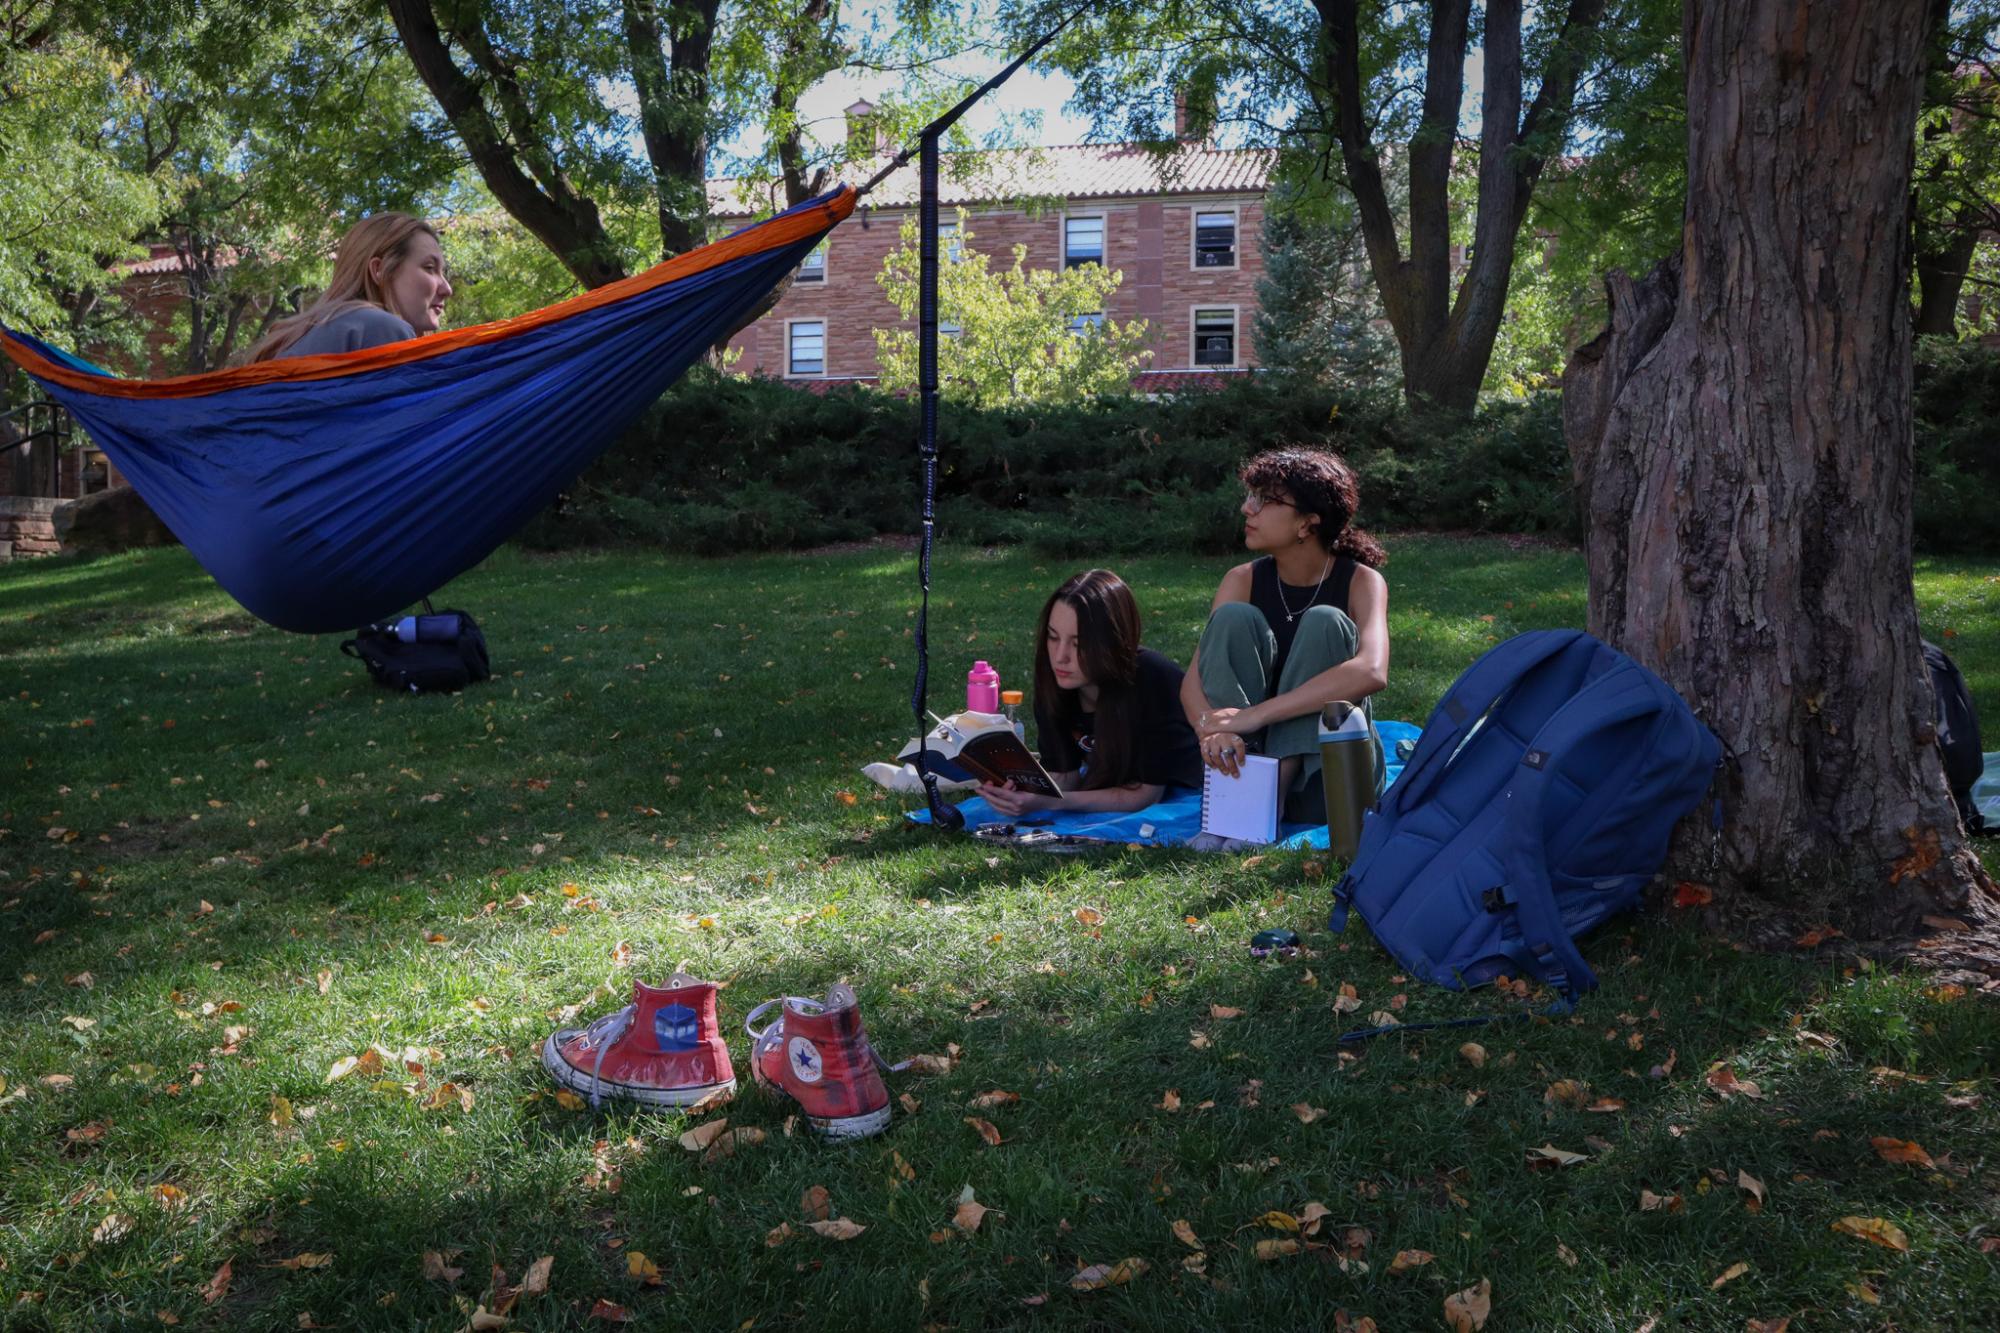 Students sitting on the grass and in a hammock on Farrand Field